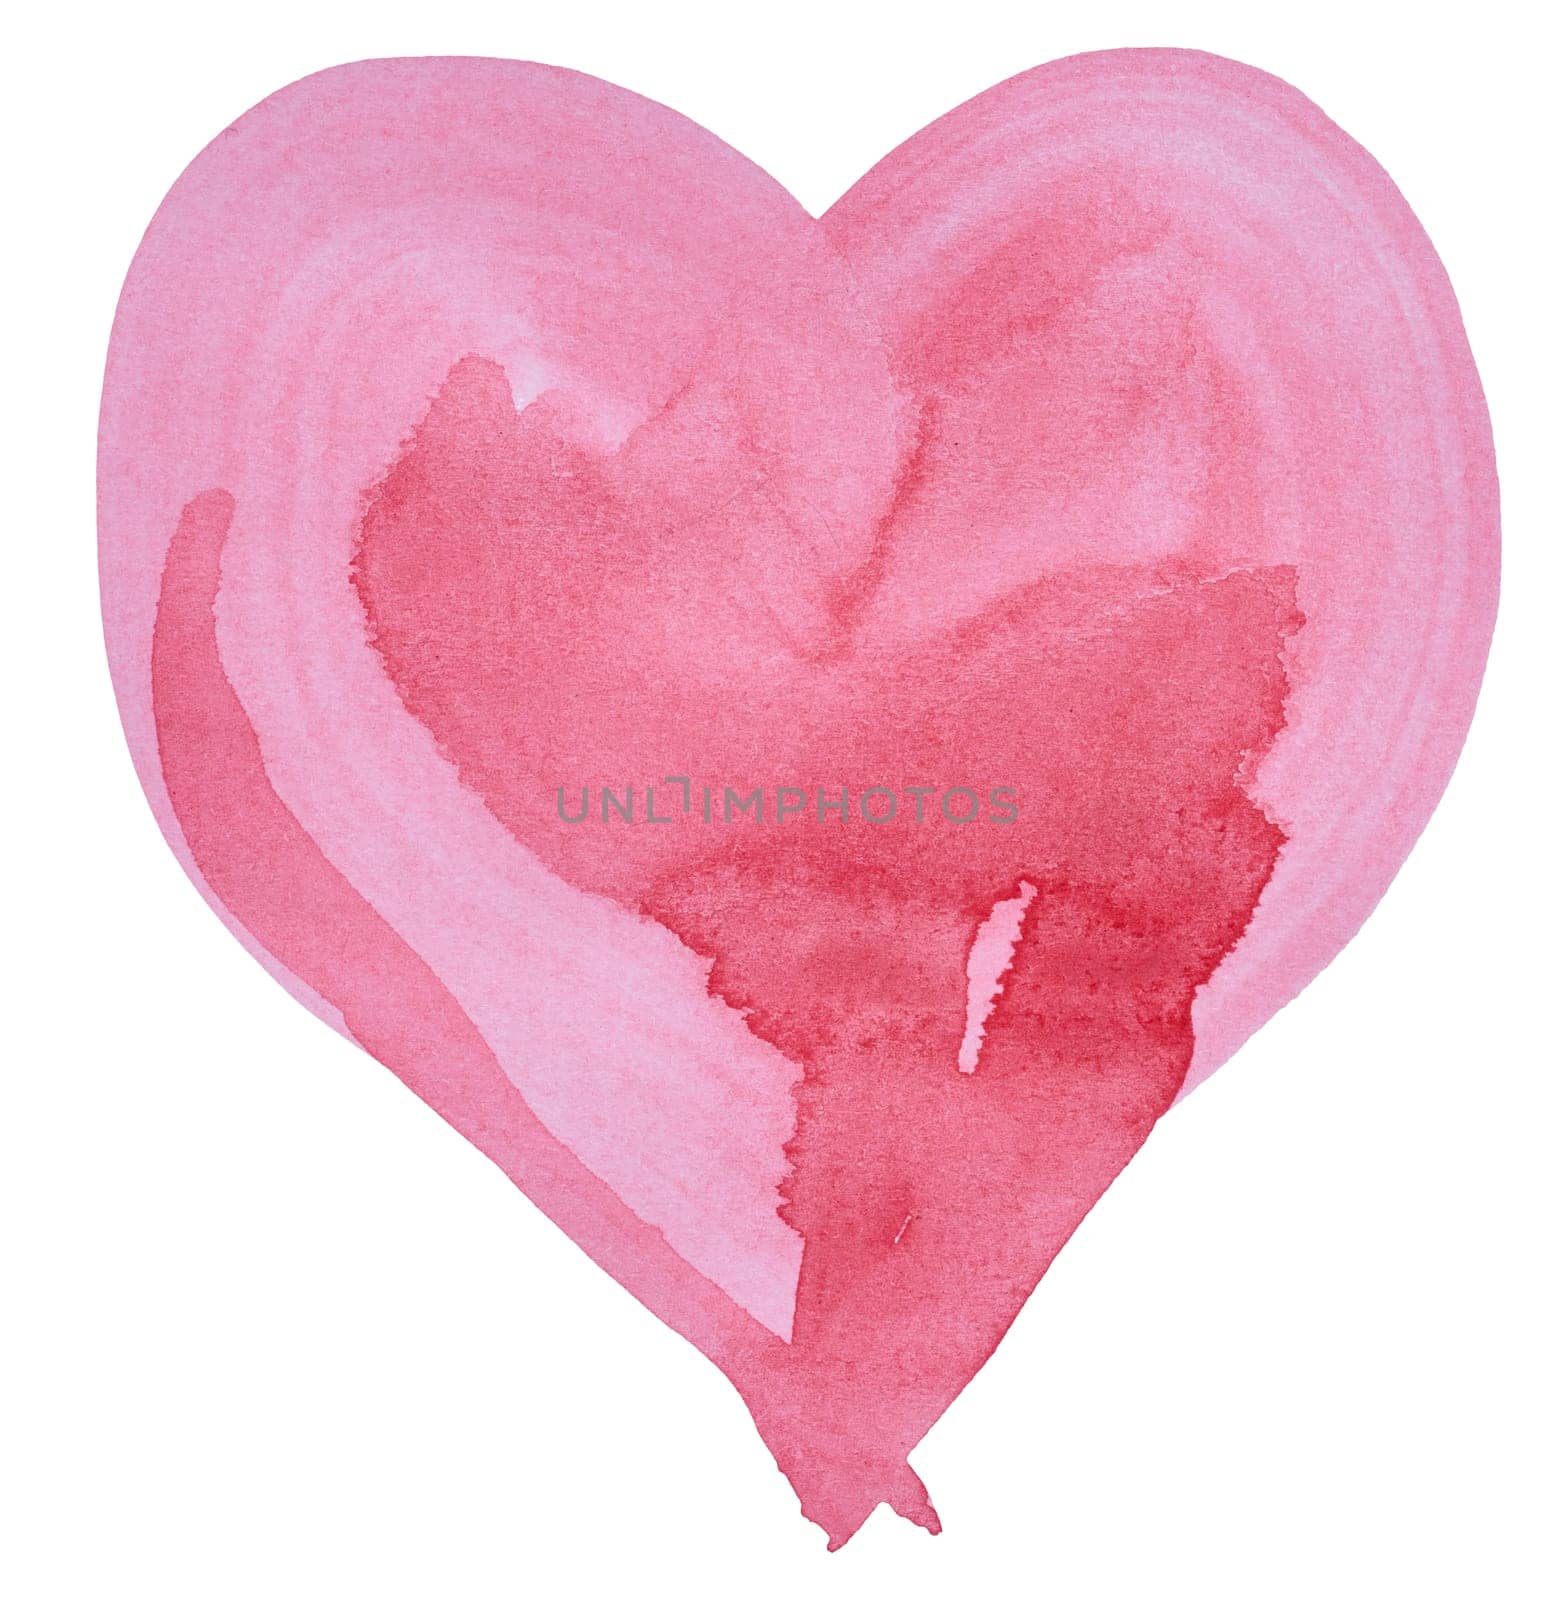 Heart drawn with watercolor paint, element for designer by ndanko